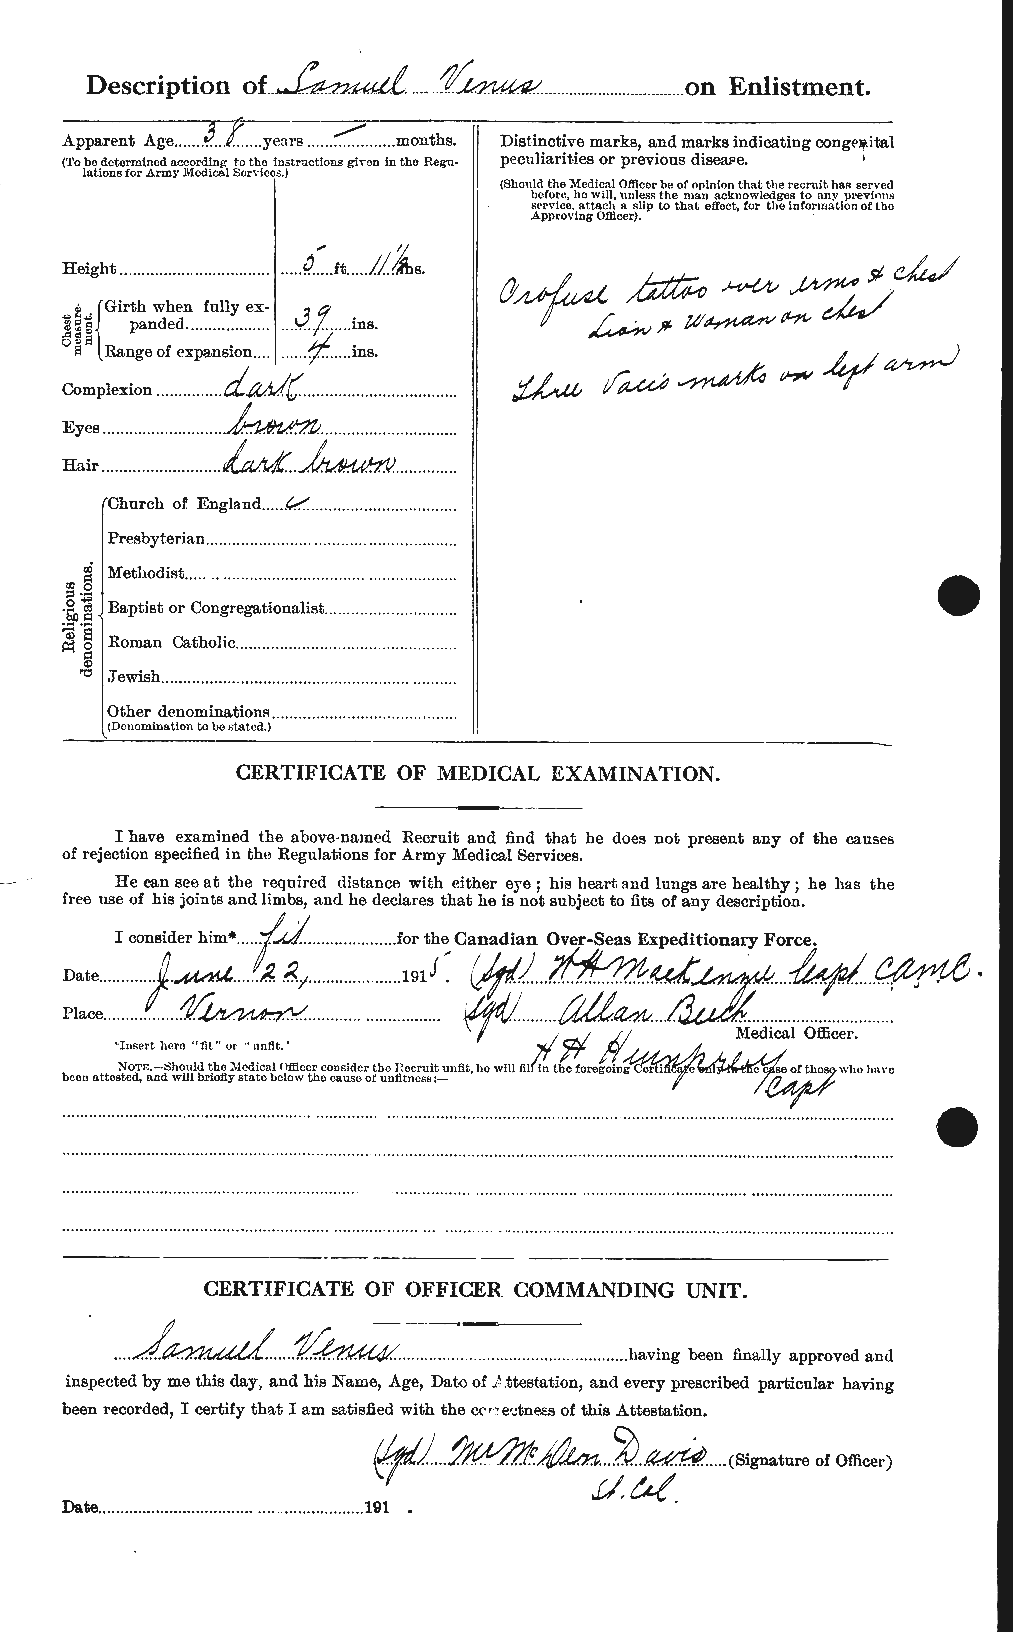 Personnel Records of the First World War - CEF 649391b